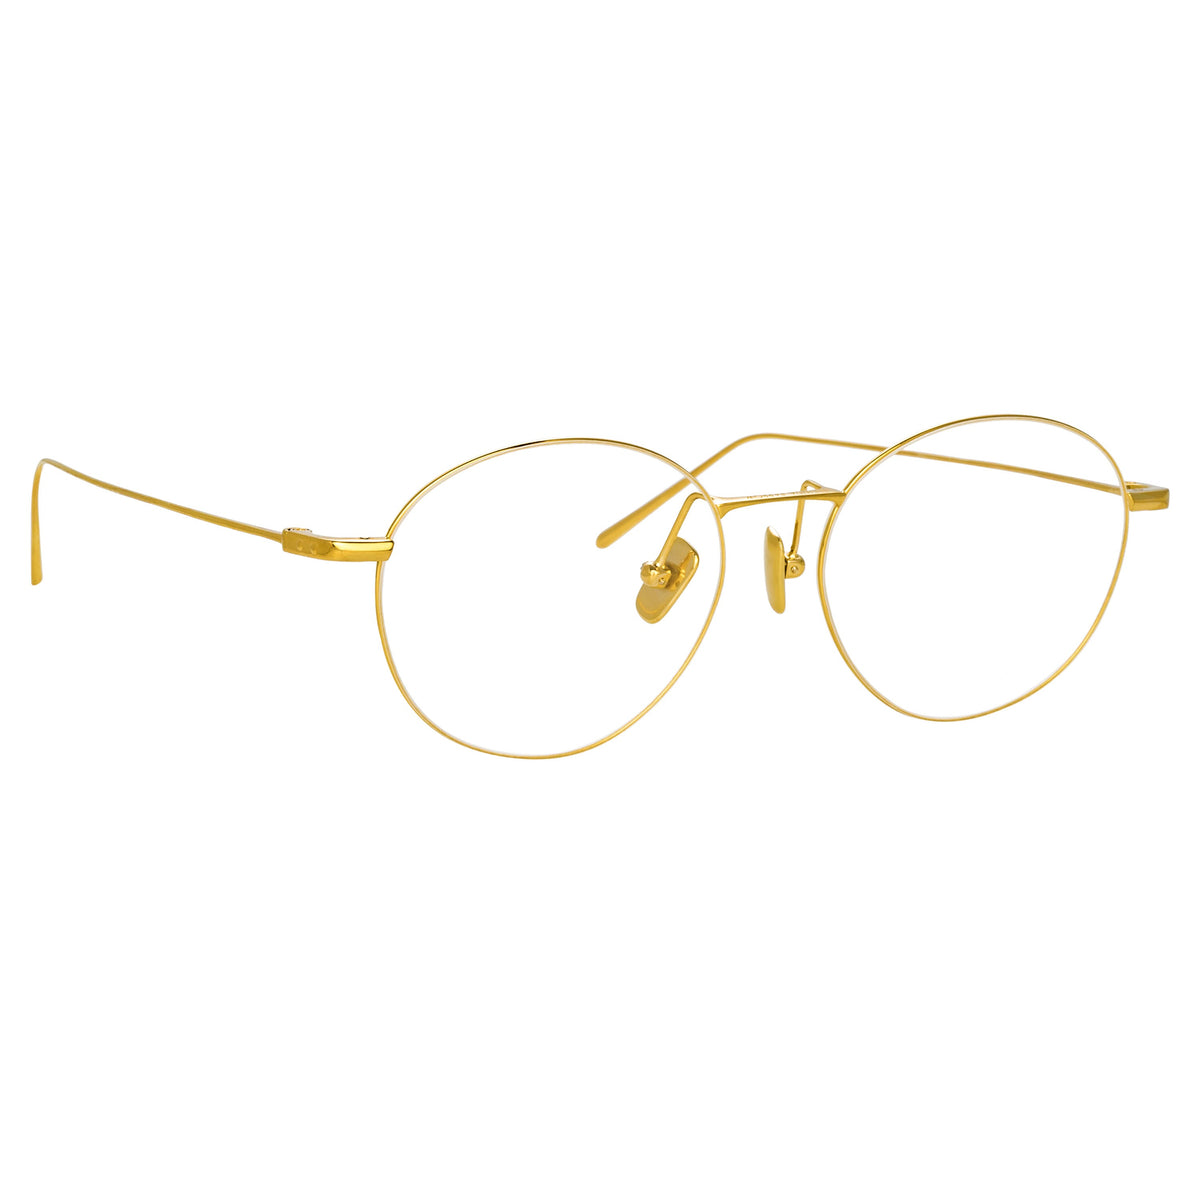 Mayne Oval Glasses in Yellow Gold frame by LINDA FARROW Linear – LINDA ...